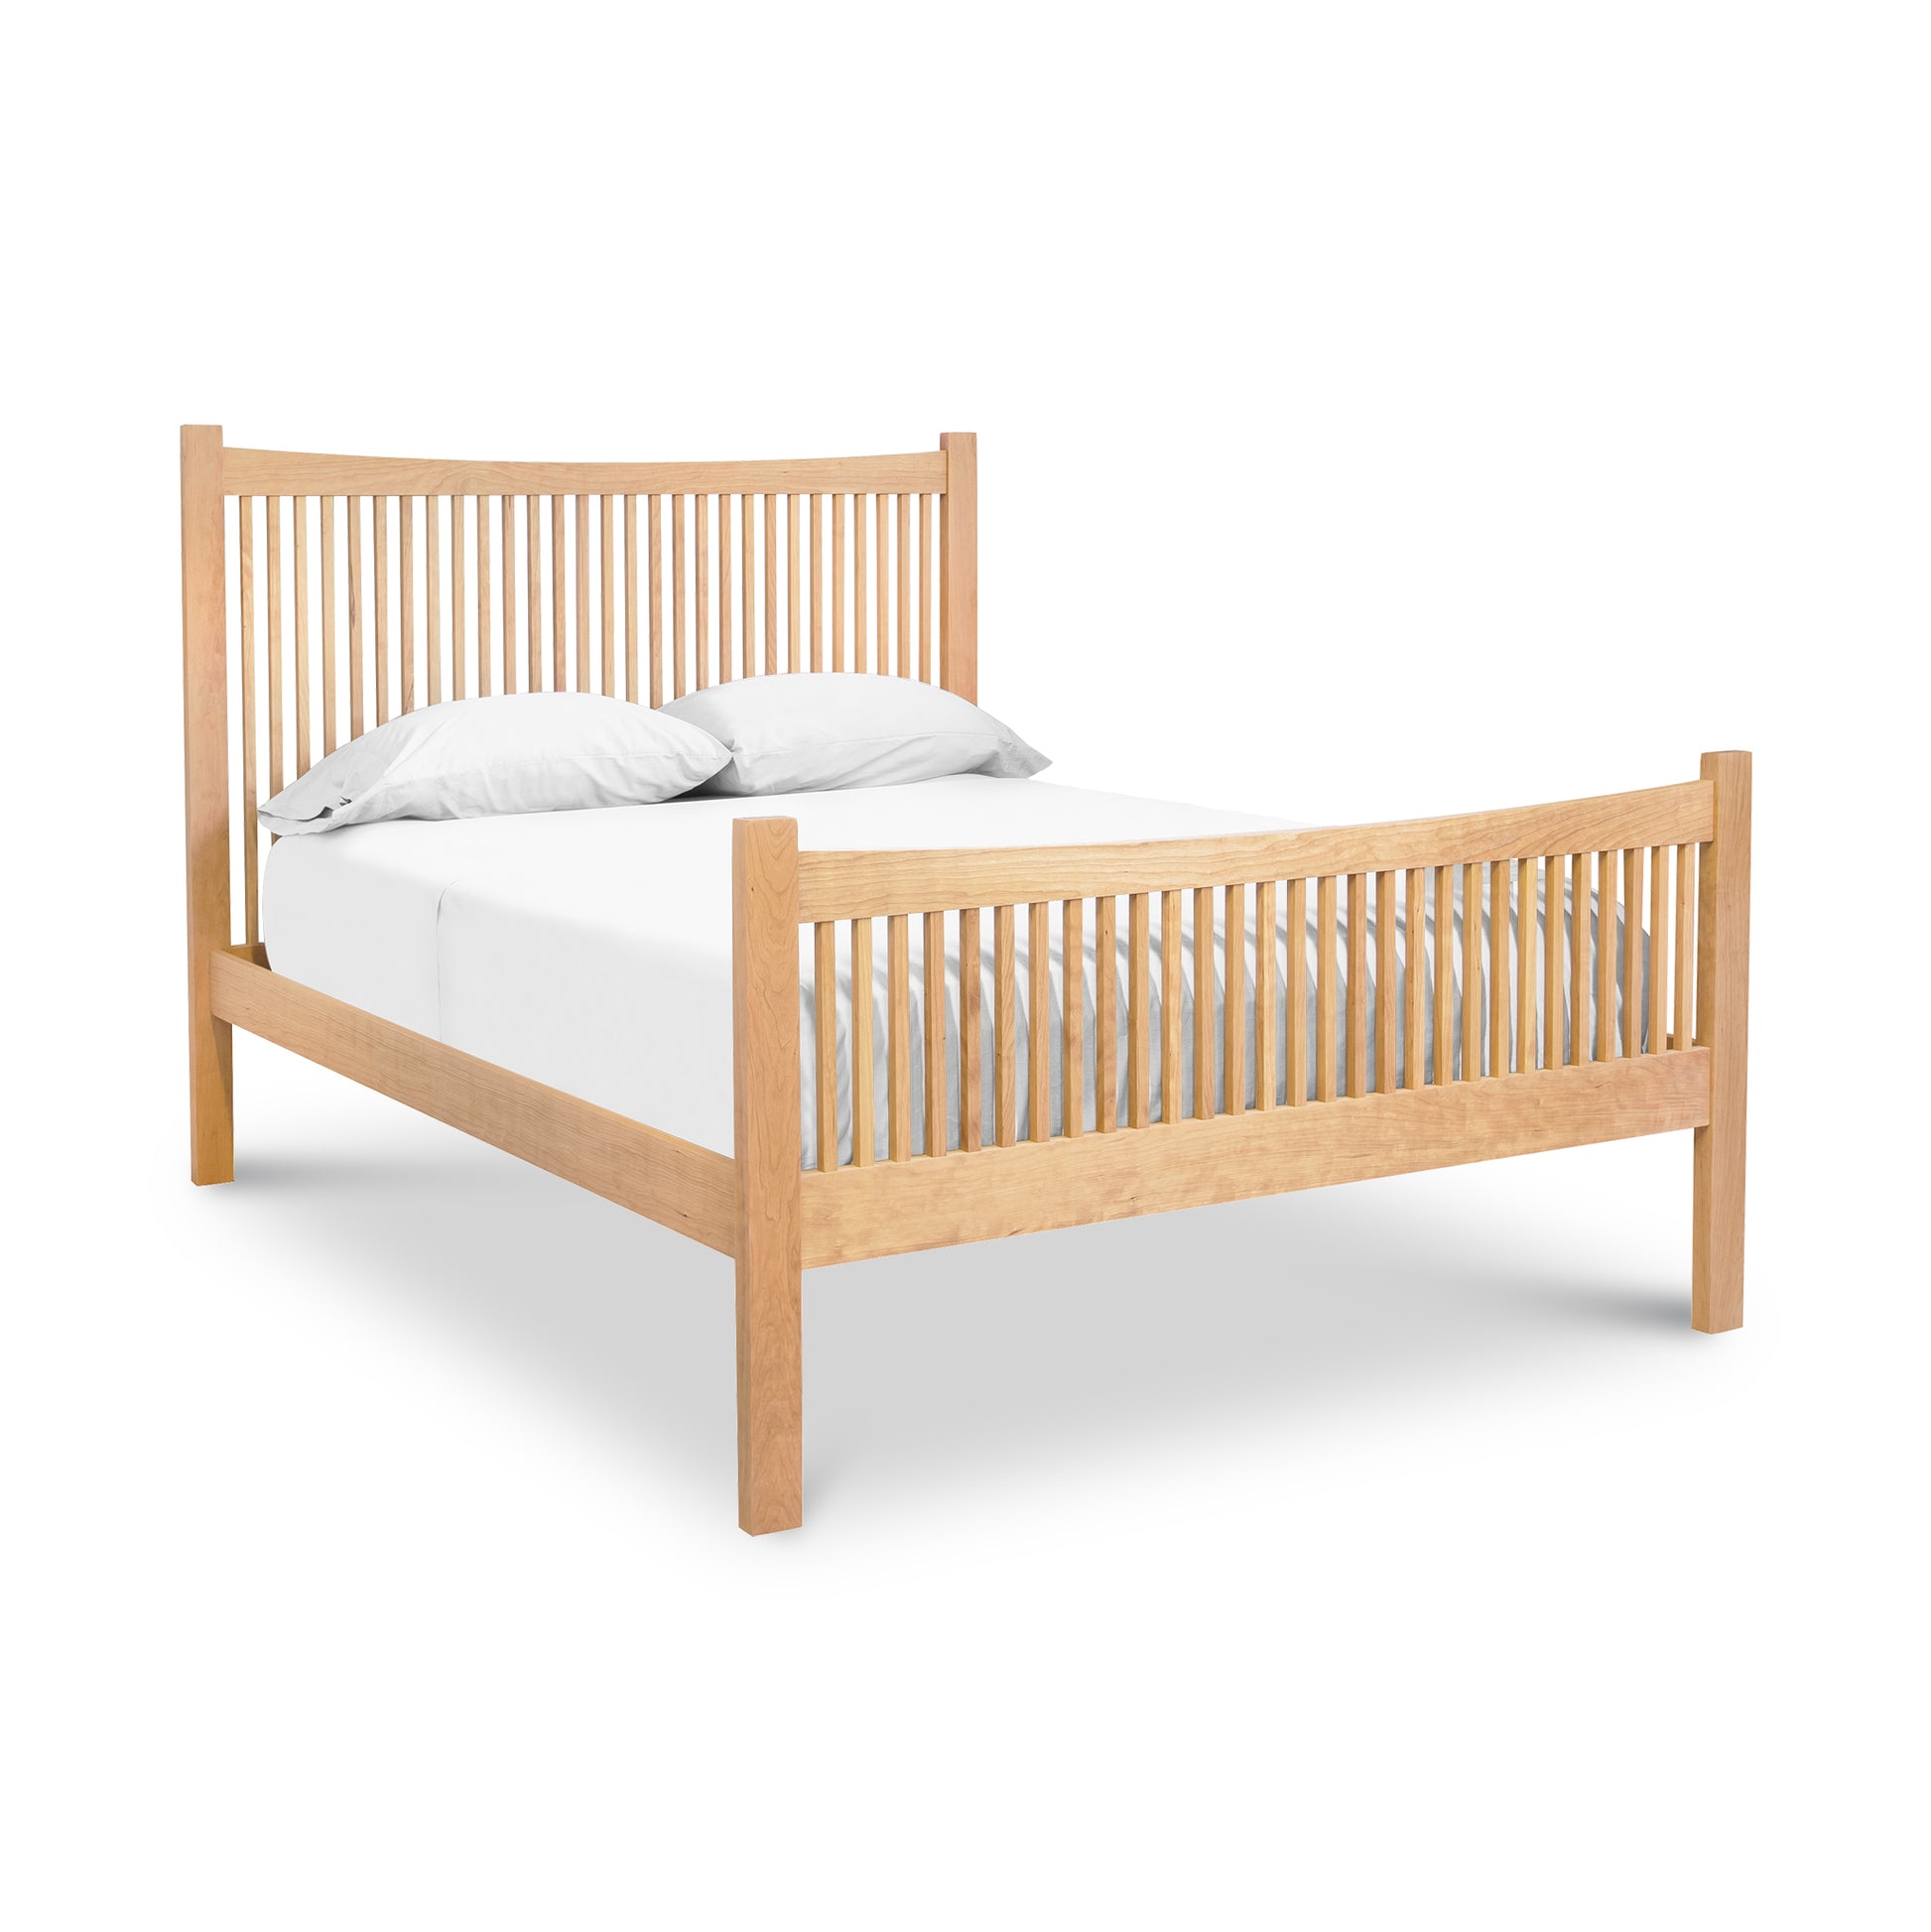 A high-end Vermont Furniture Designs Burlington Shaker High Footboard bed made with solid maple wood, featuring white sheets.